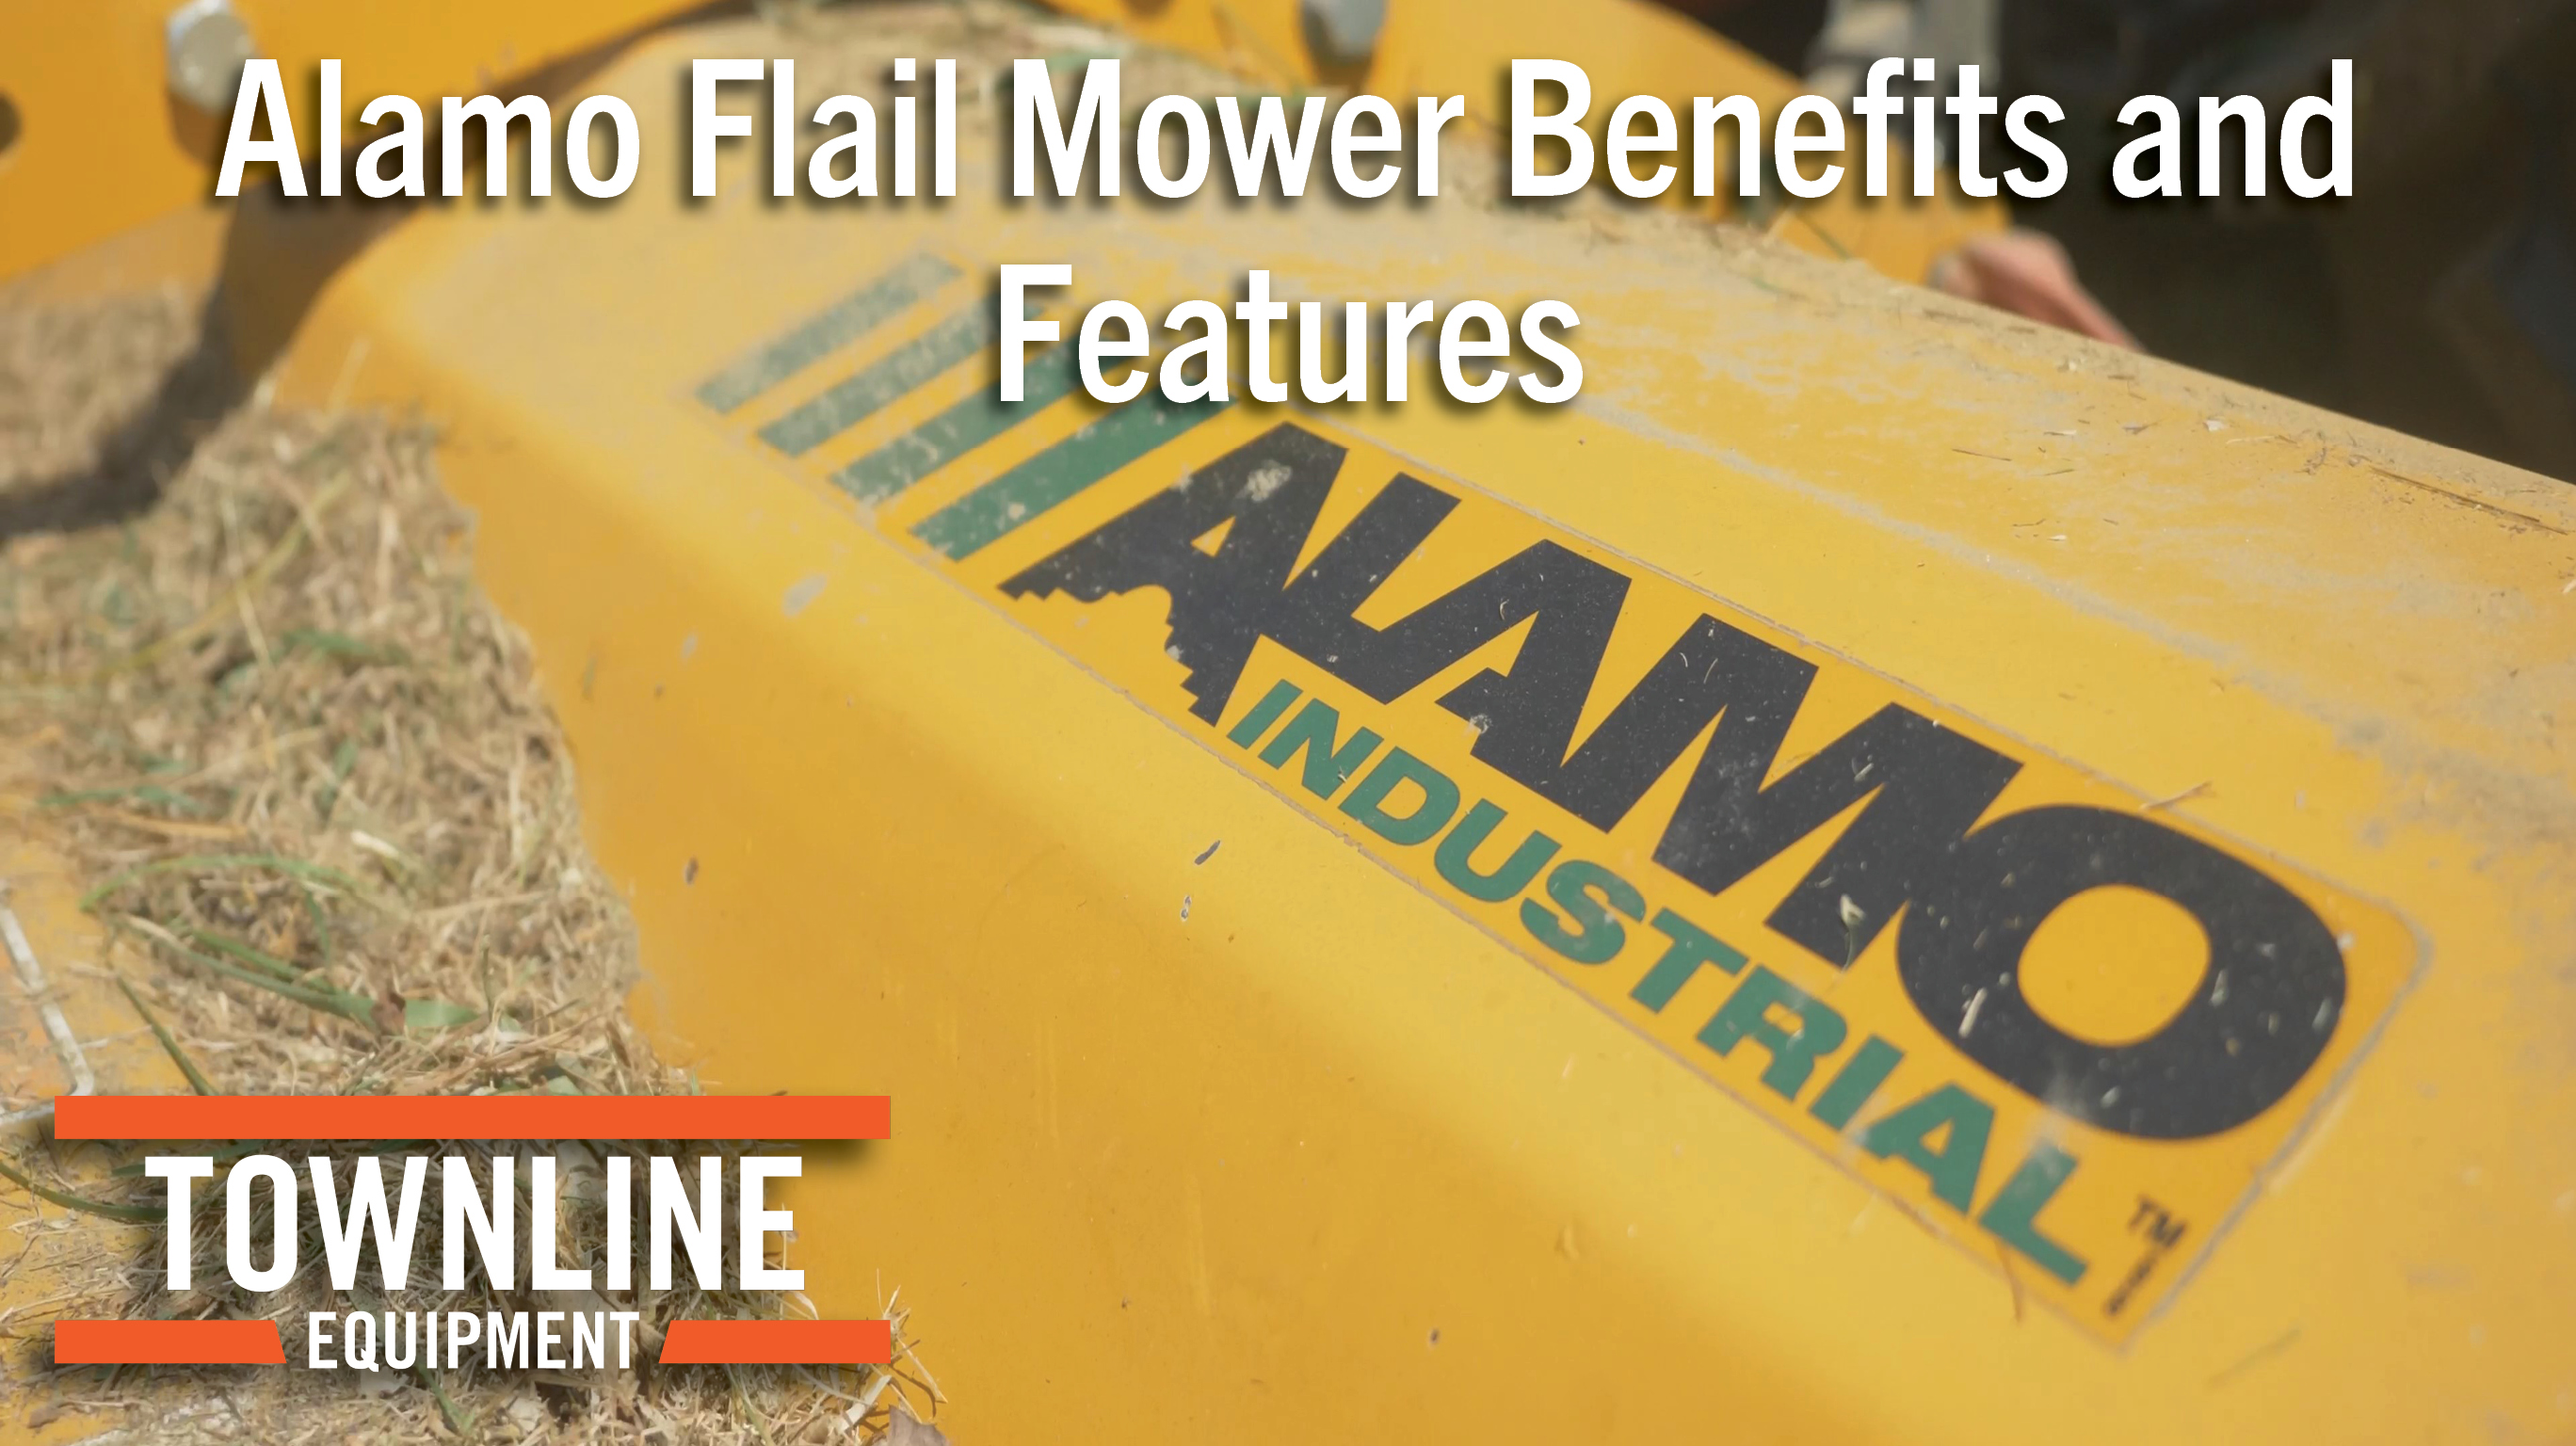 Alamo Flail Mower Benefits and Features